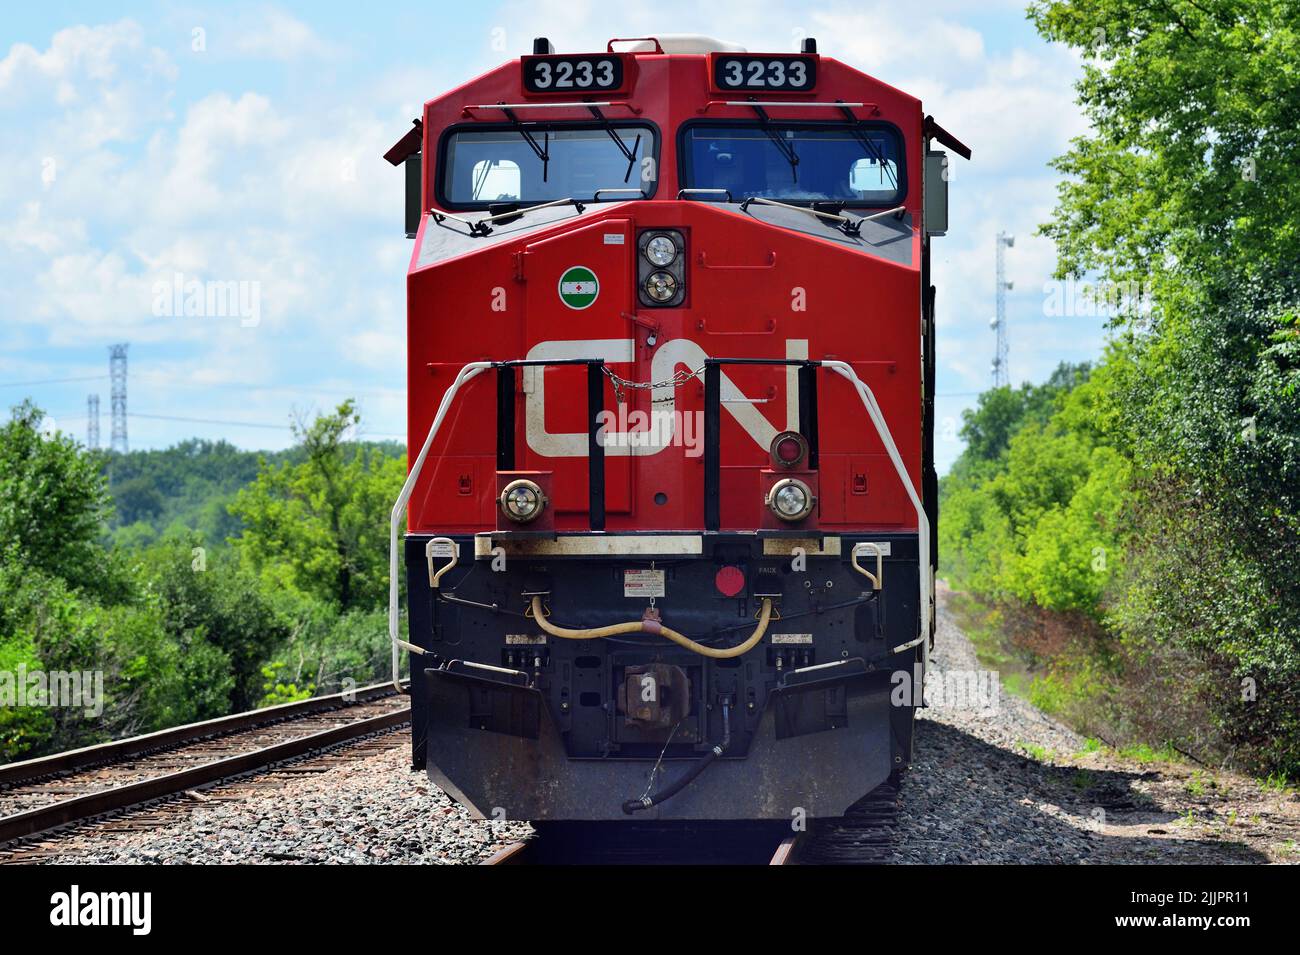 Bartlett, Illinois, USA. Canadian National Railway locomotives, fronted by a specially painted unit honoring veterans, awaiting a crew. Stock Photo